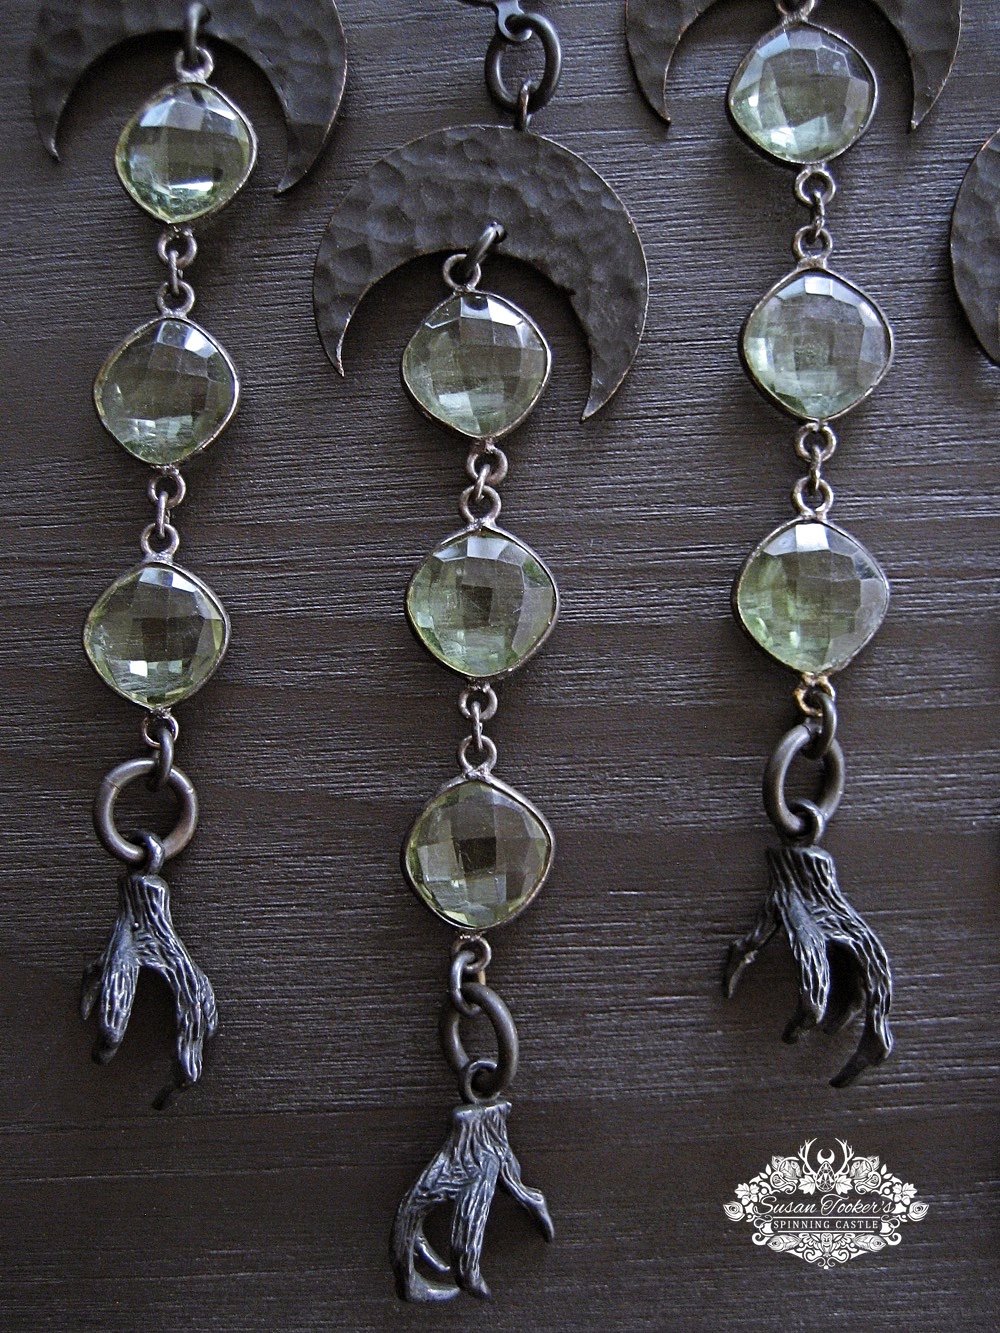 Image of SWAMP WITCH - Cresent Moon Dragon Claw Green Amethyst Earrings Boho Witchy Drop Dangles